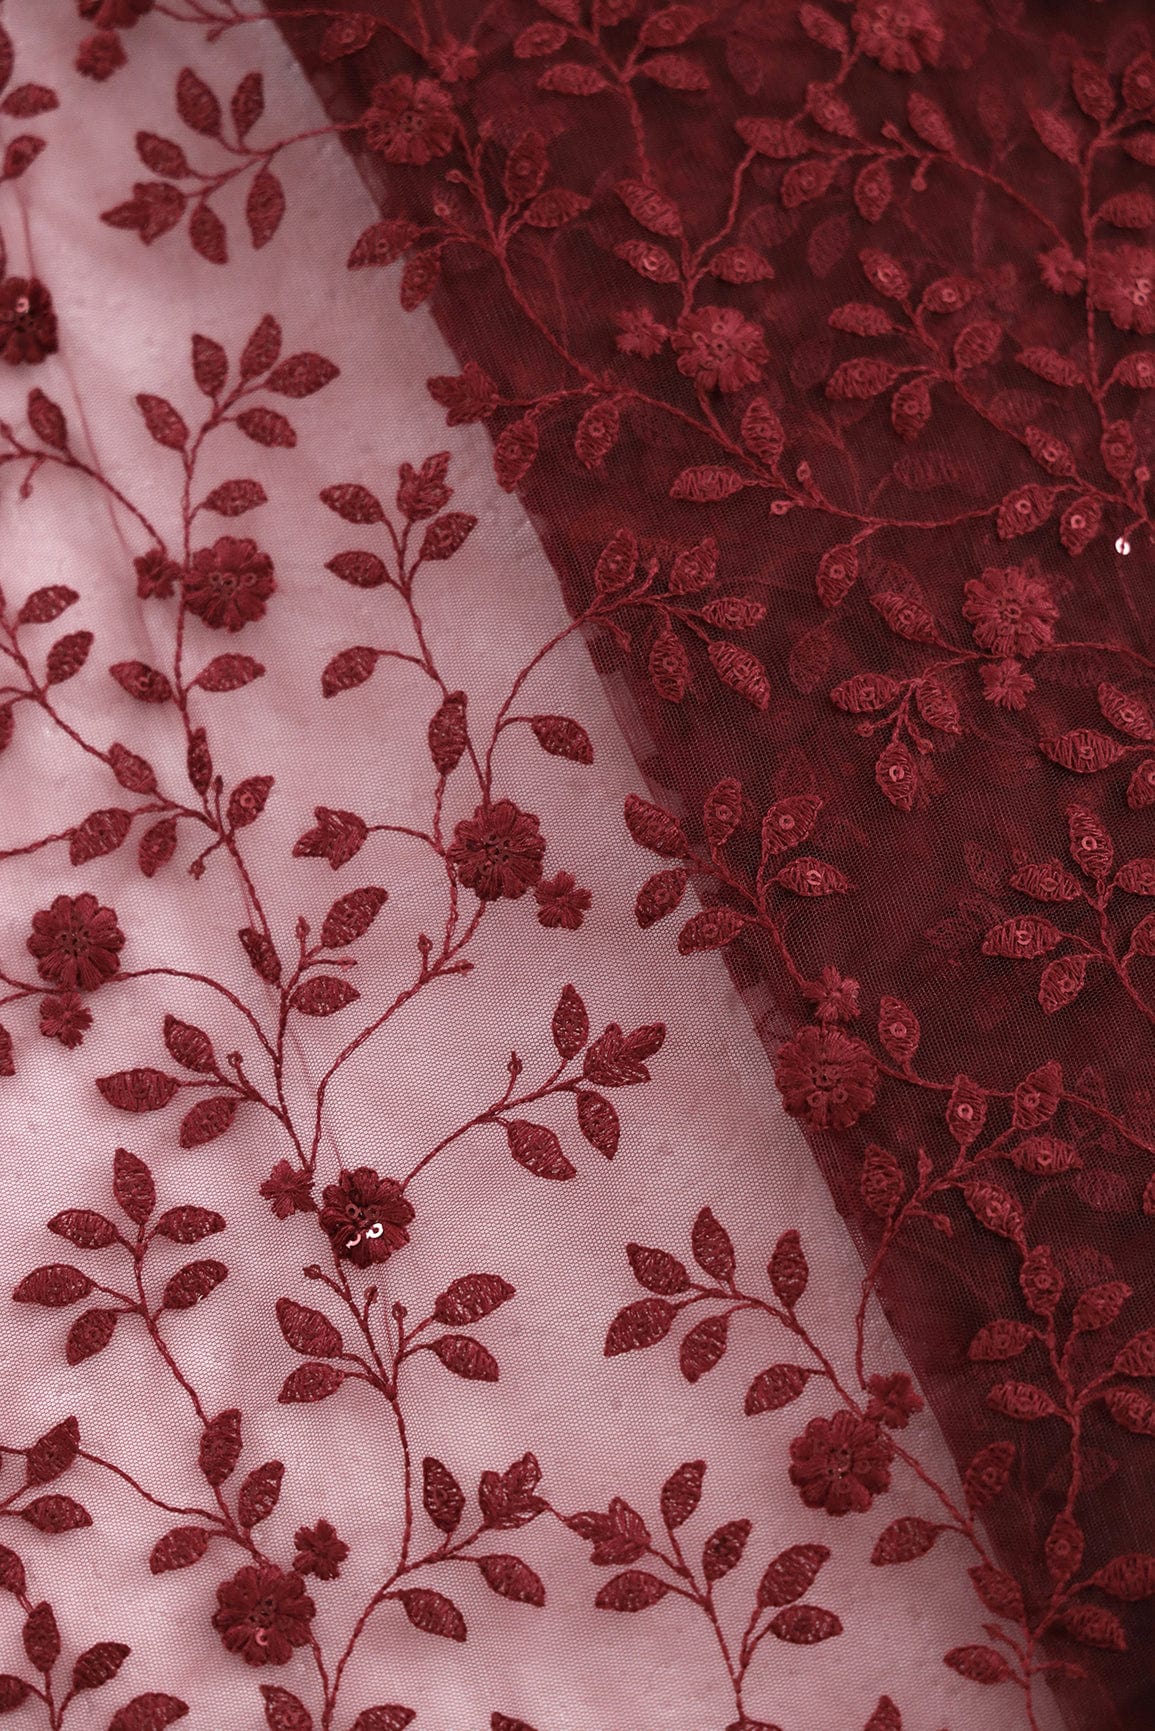 doeraa Embroidery Fabrics Maroon Thread And Sequins Floral Heavy Embroidery Work On Maroon Soft Net Fabric